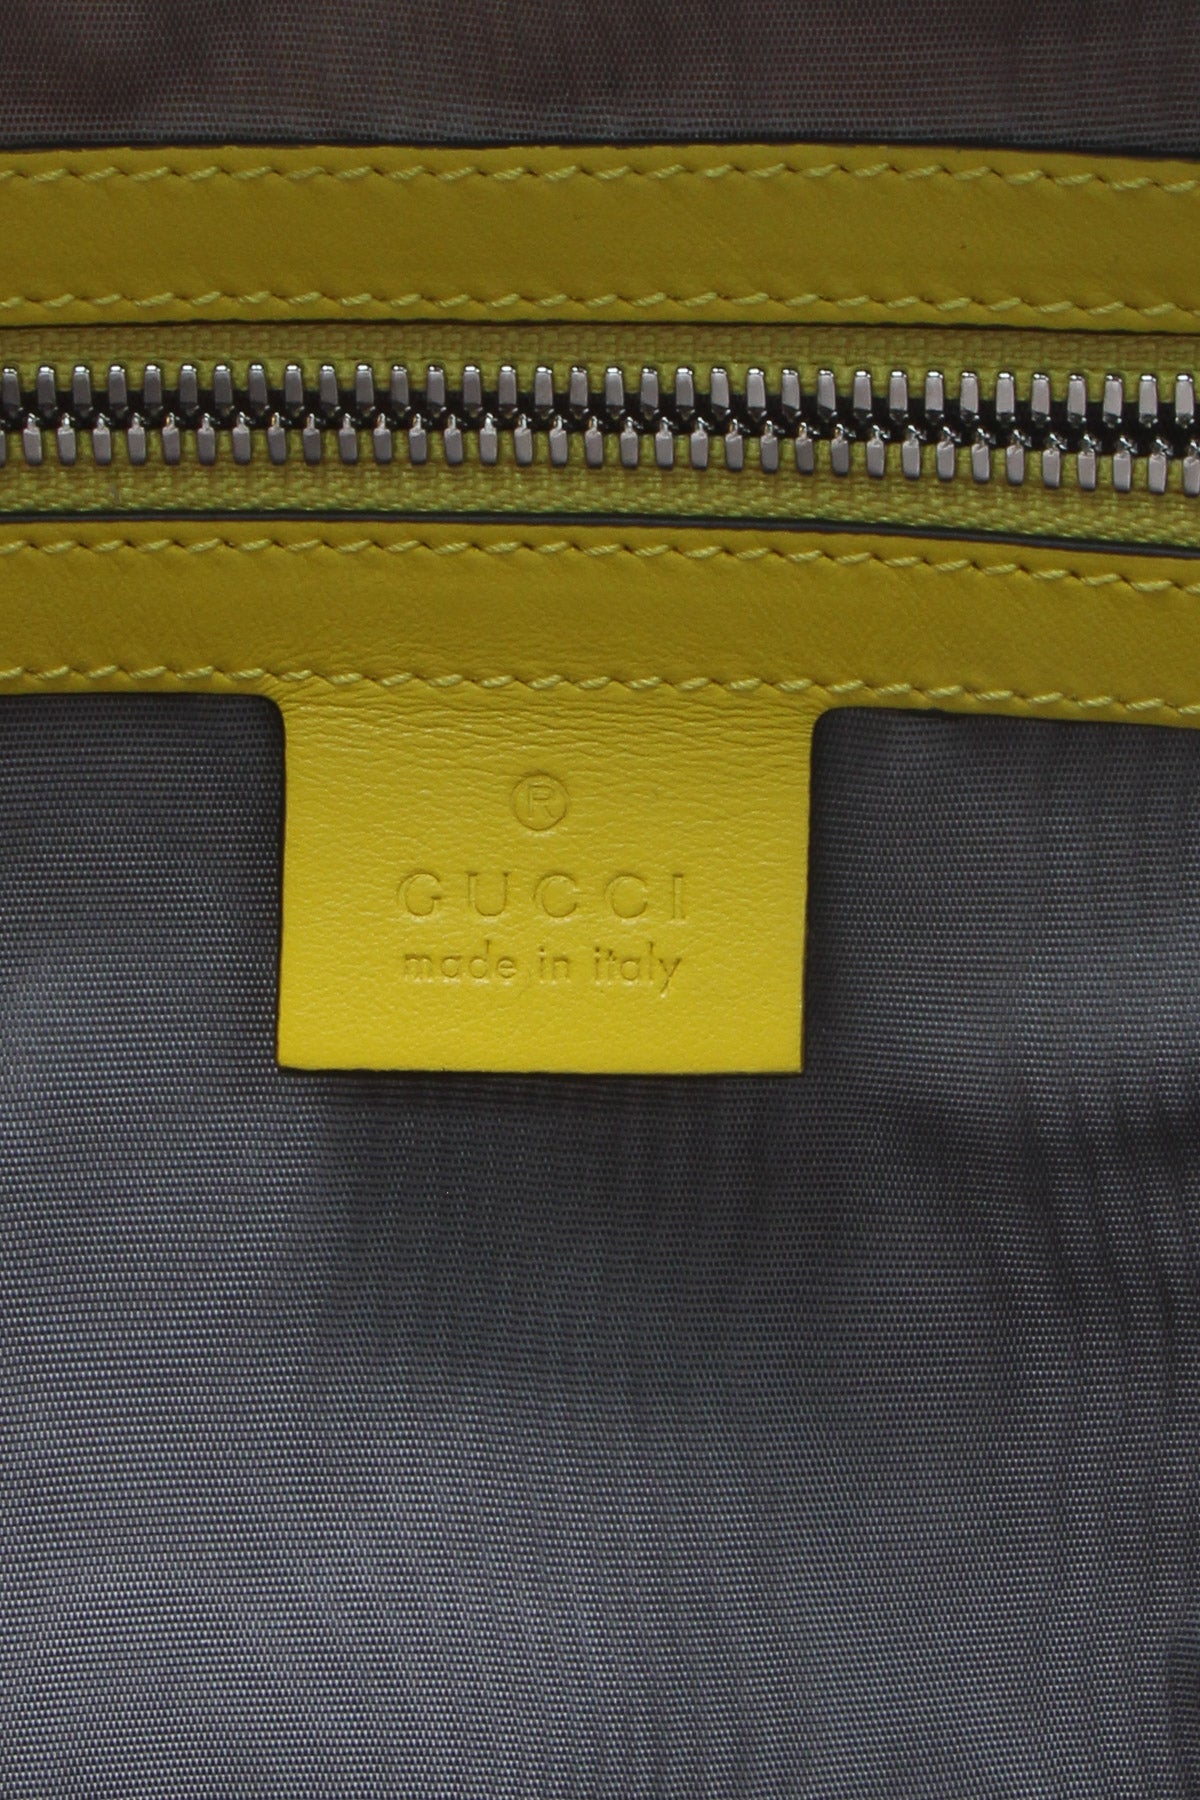 Gucci Eden Day Backpack - Couture USA